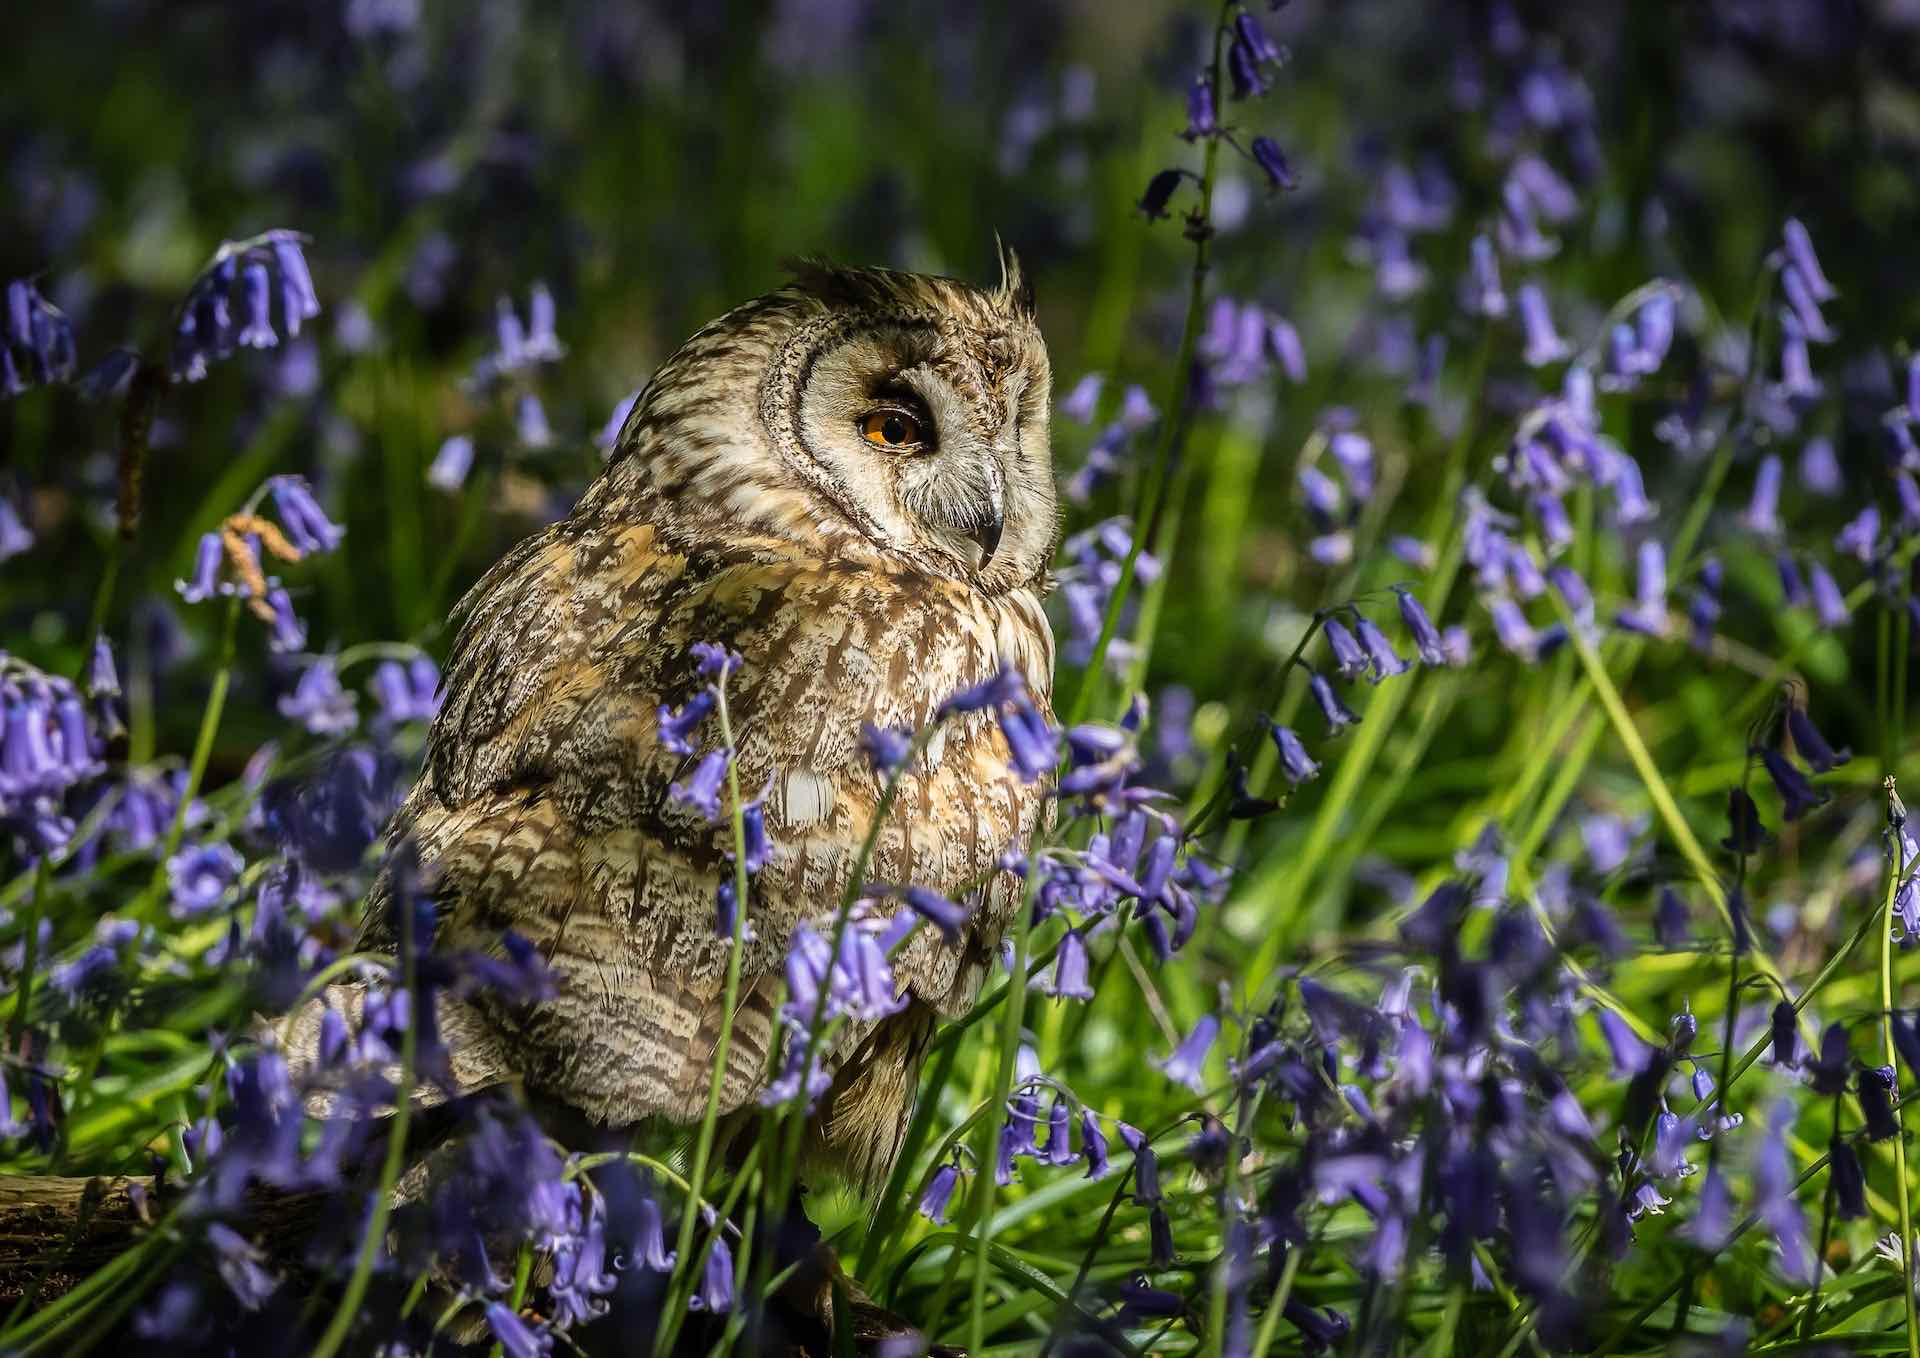 Close up of an owl in focus against purple flowers. Wildlife photography.